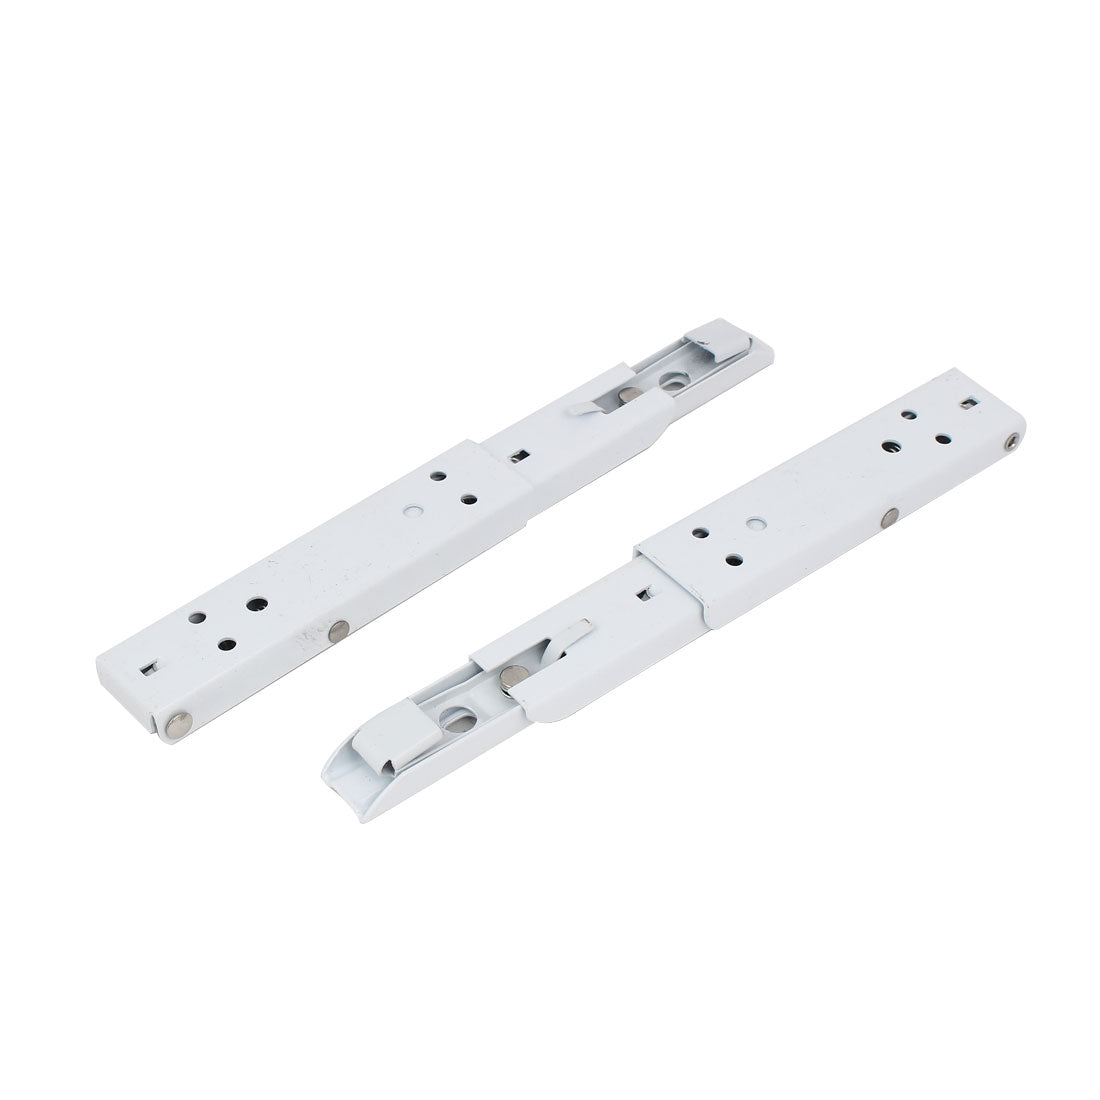 uxcell Uxcell 10-inch Long Metal Spring Loaded Folding Shelf Bracket Support White 2pcs